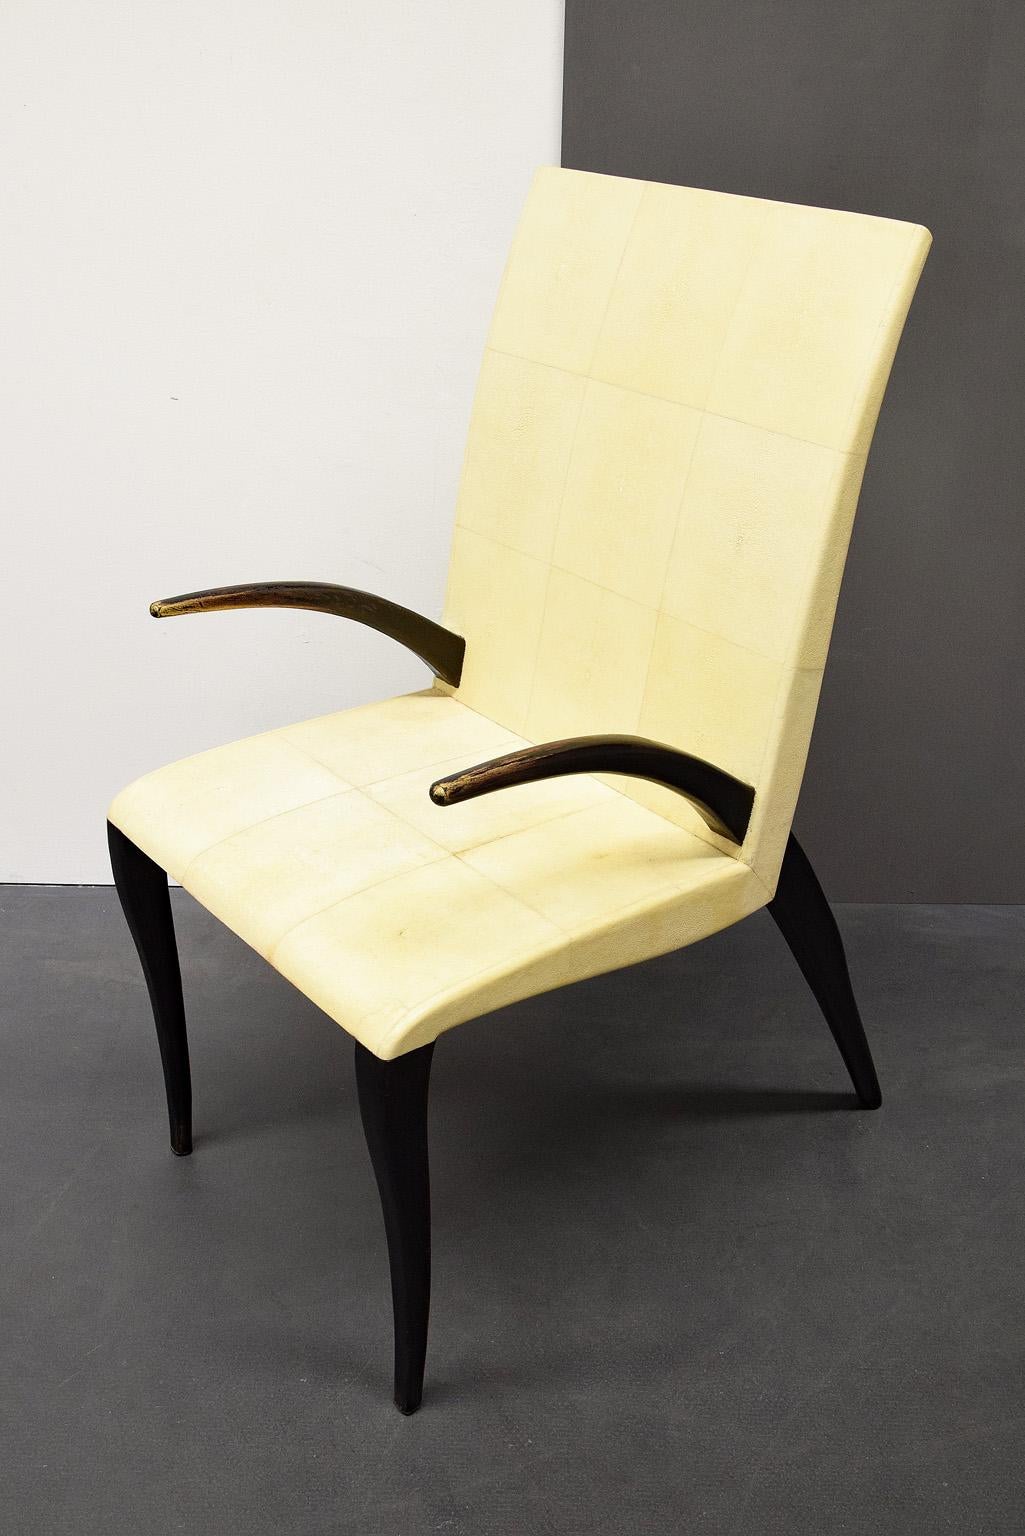 20th Century French Modern Shagreen Armchair by R and Y Augousti, Paris, 1980s For Sale